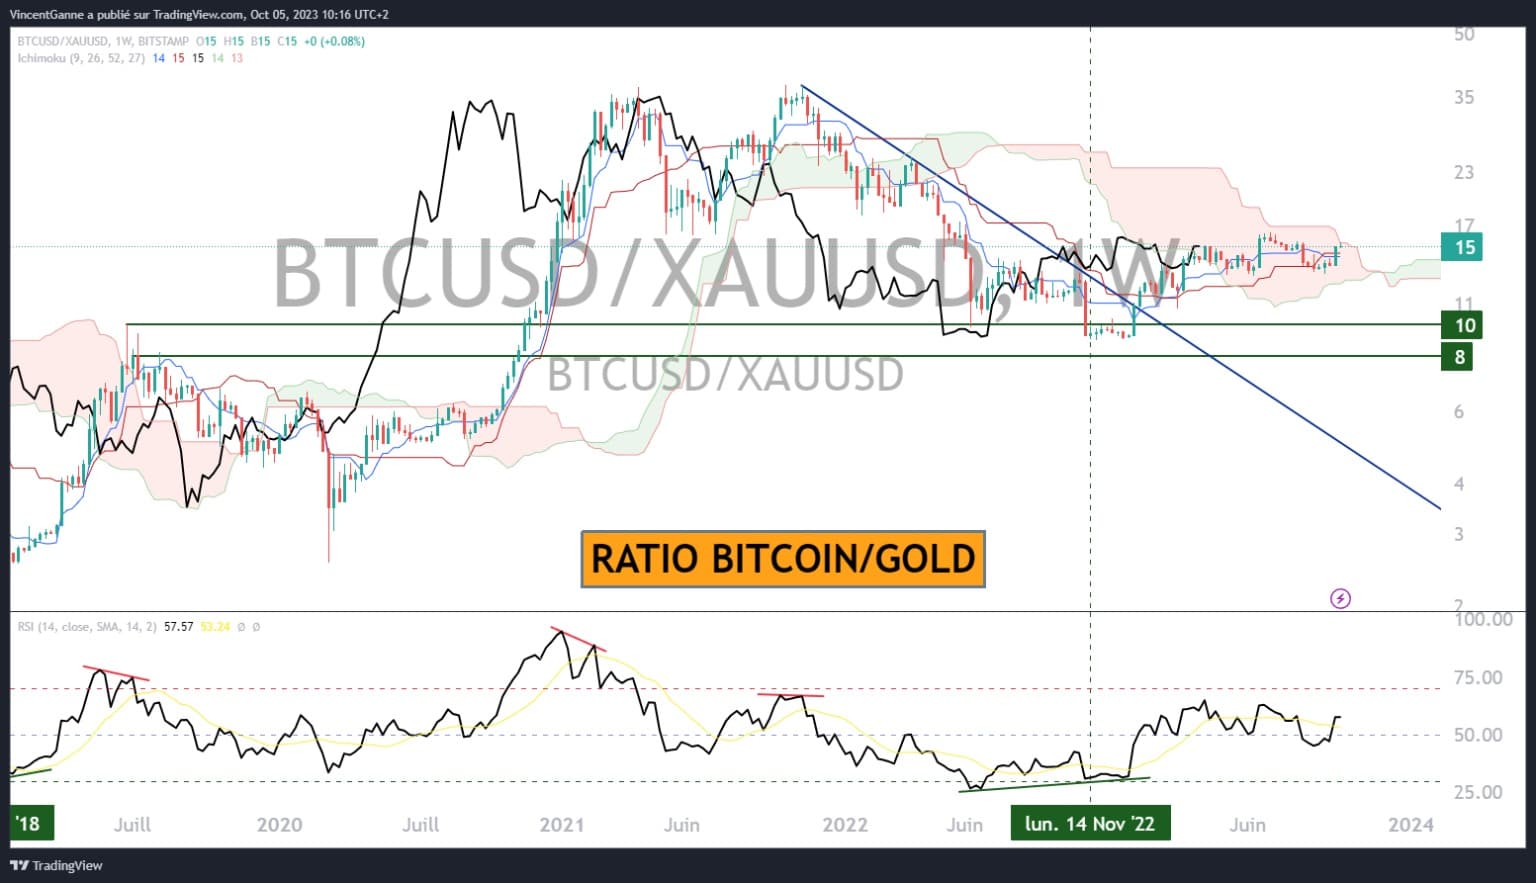 Chart representing the Bitcoin/GOLD ratio over the weekly time horizon